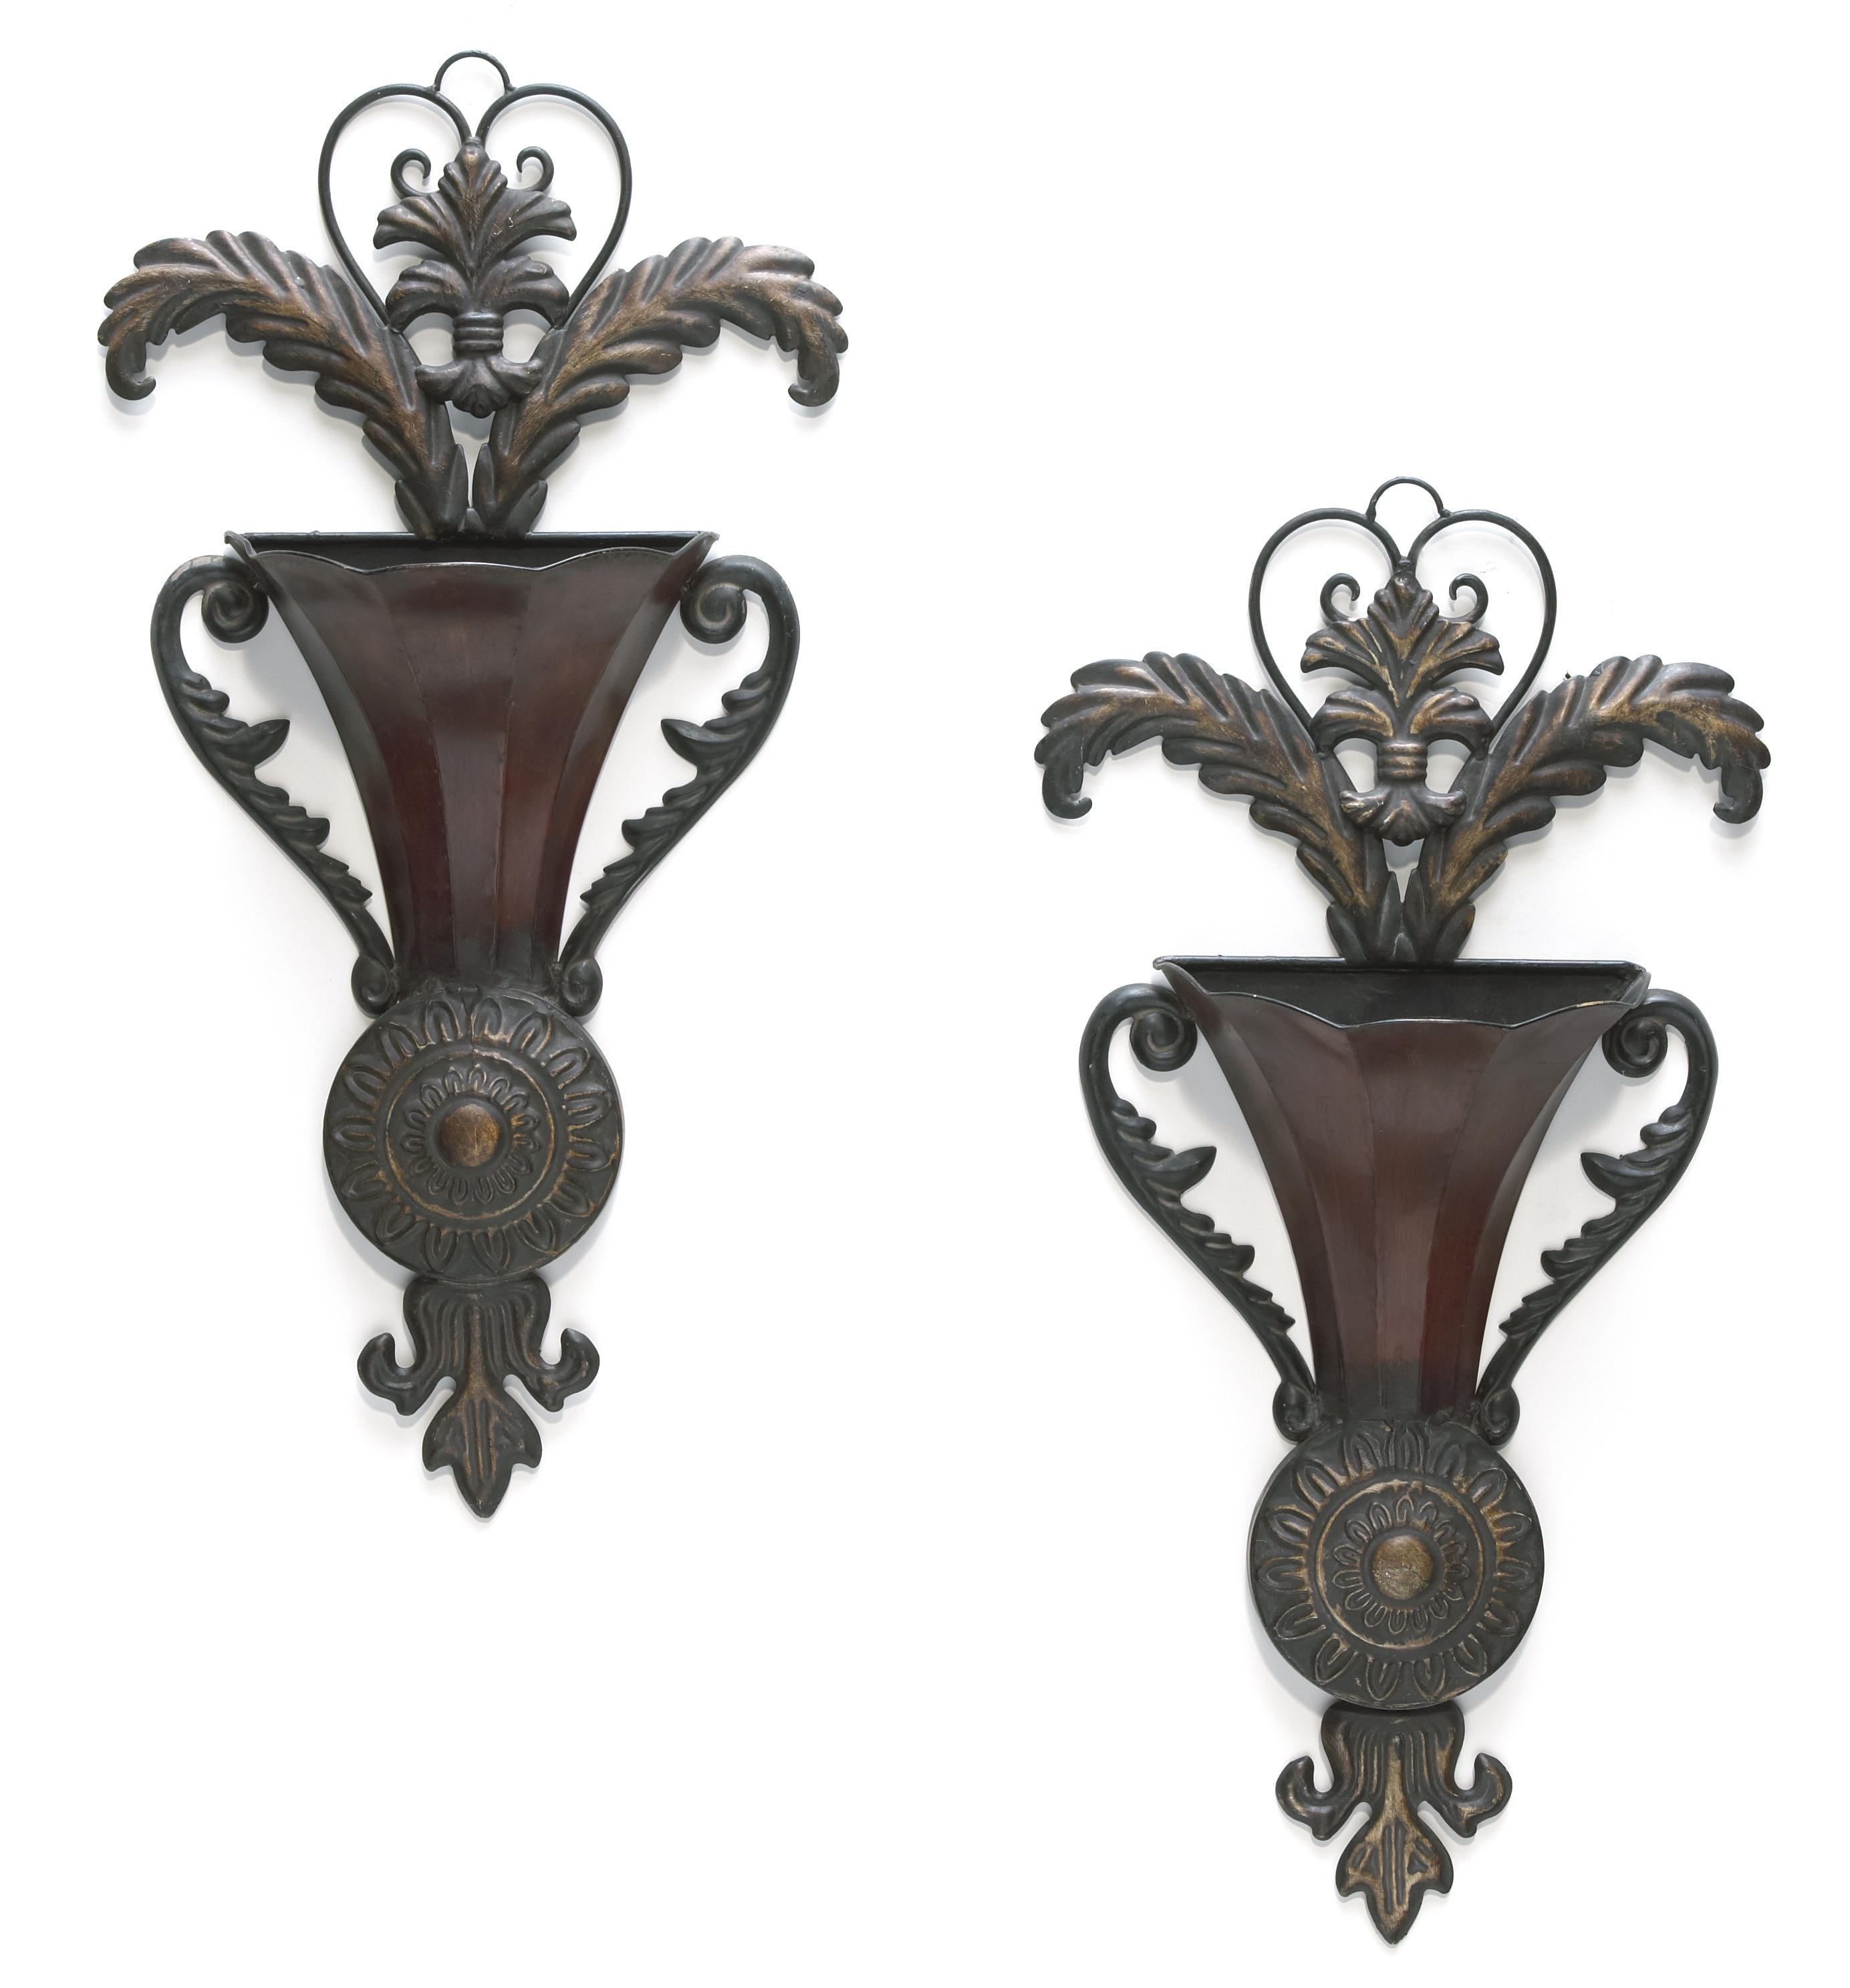 A pair of Italian Baroque style